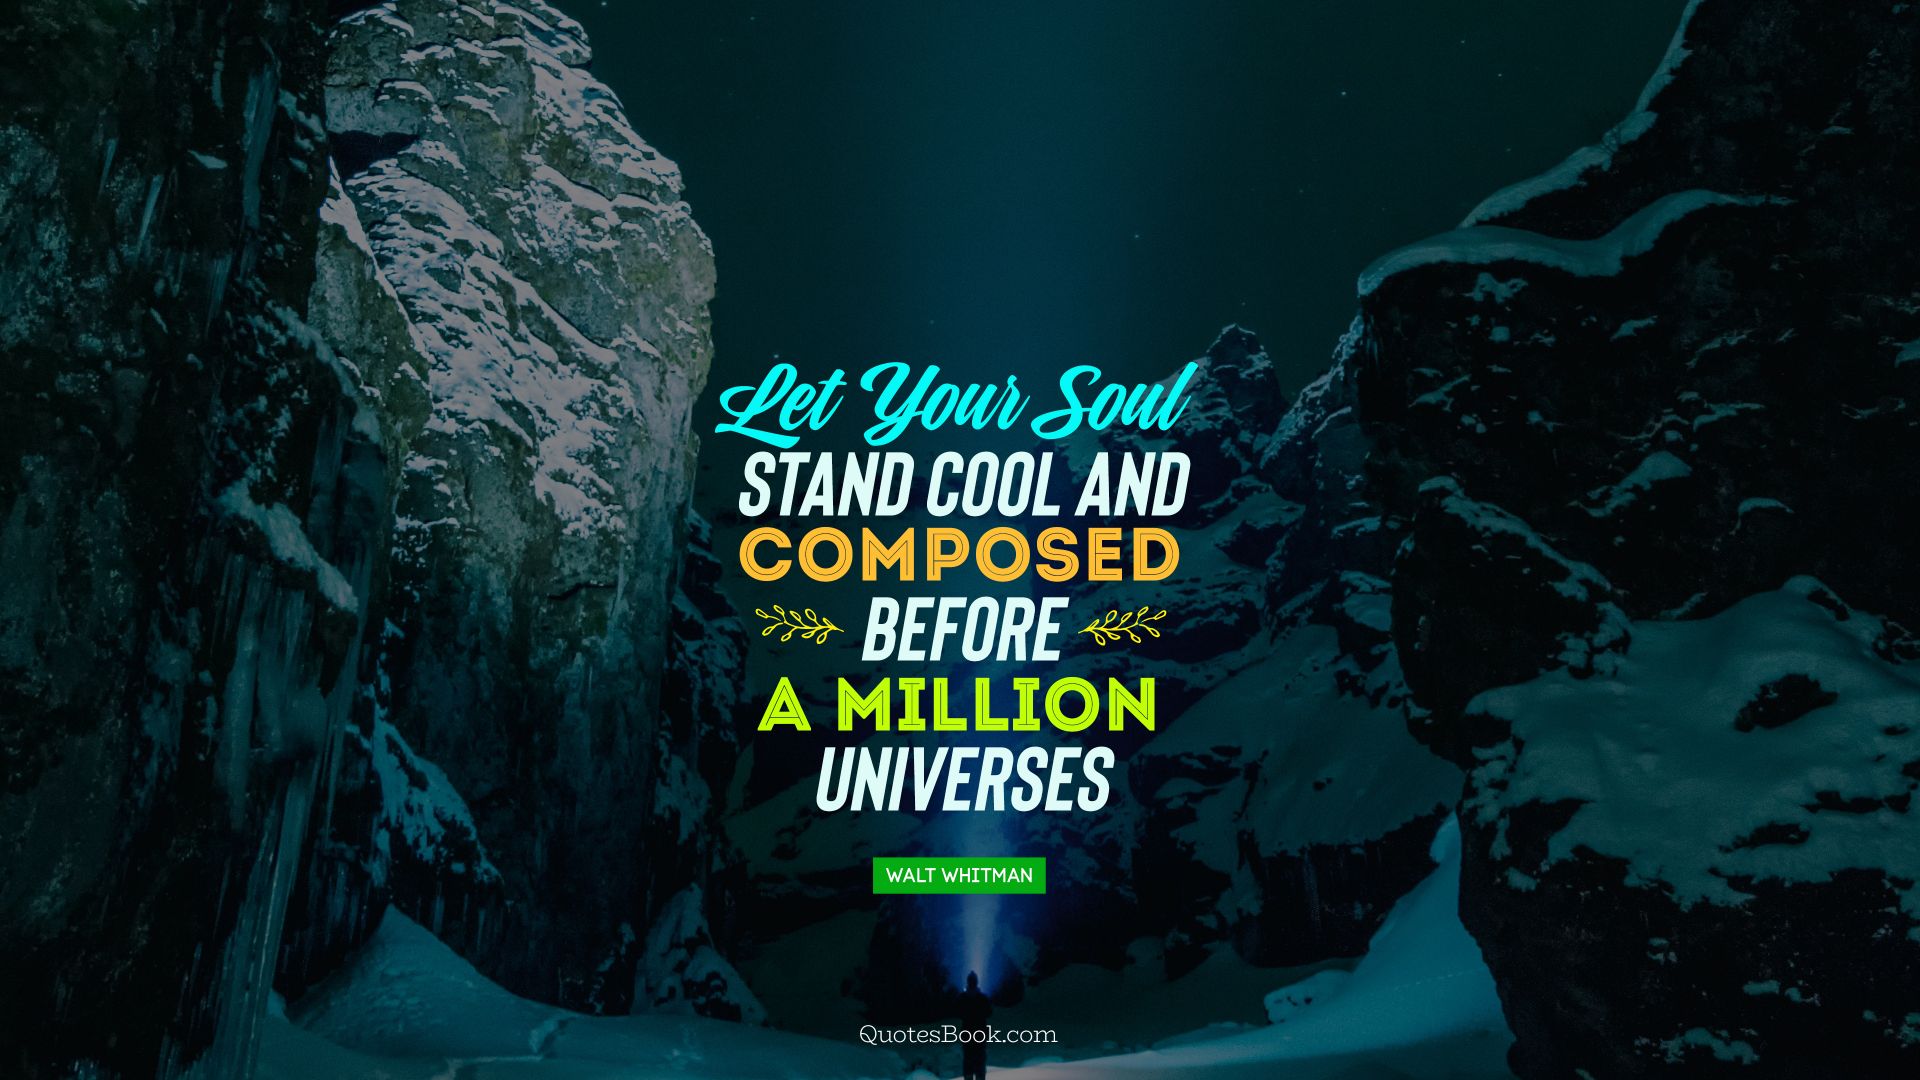 Let your soul stand cool and composed before a million universes. - Quote by Walt Whitman